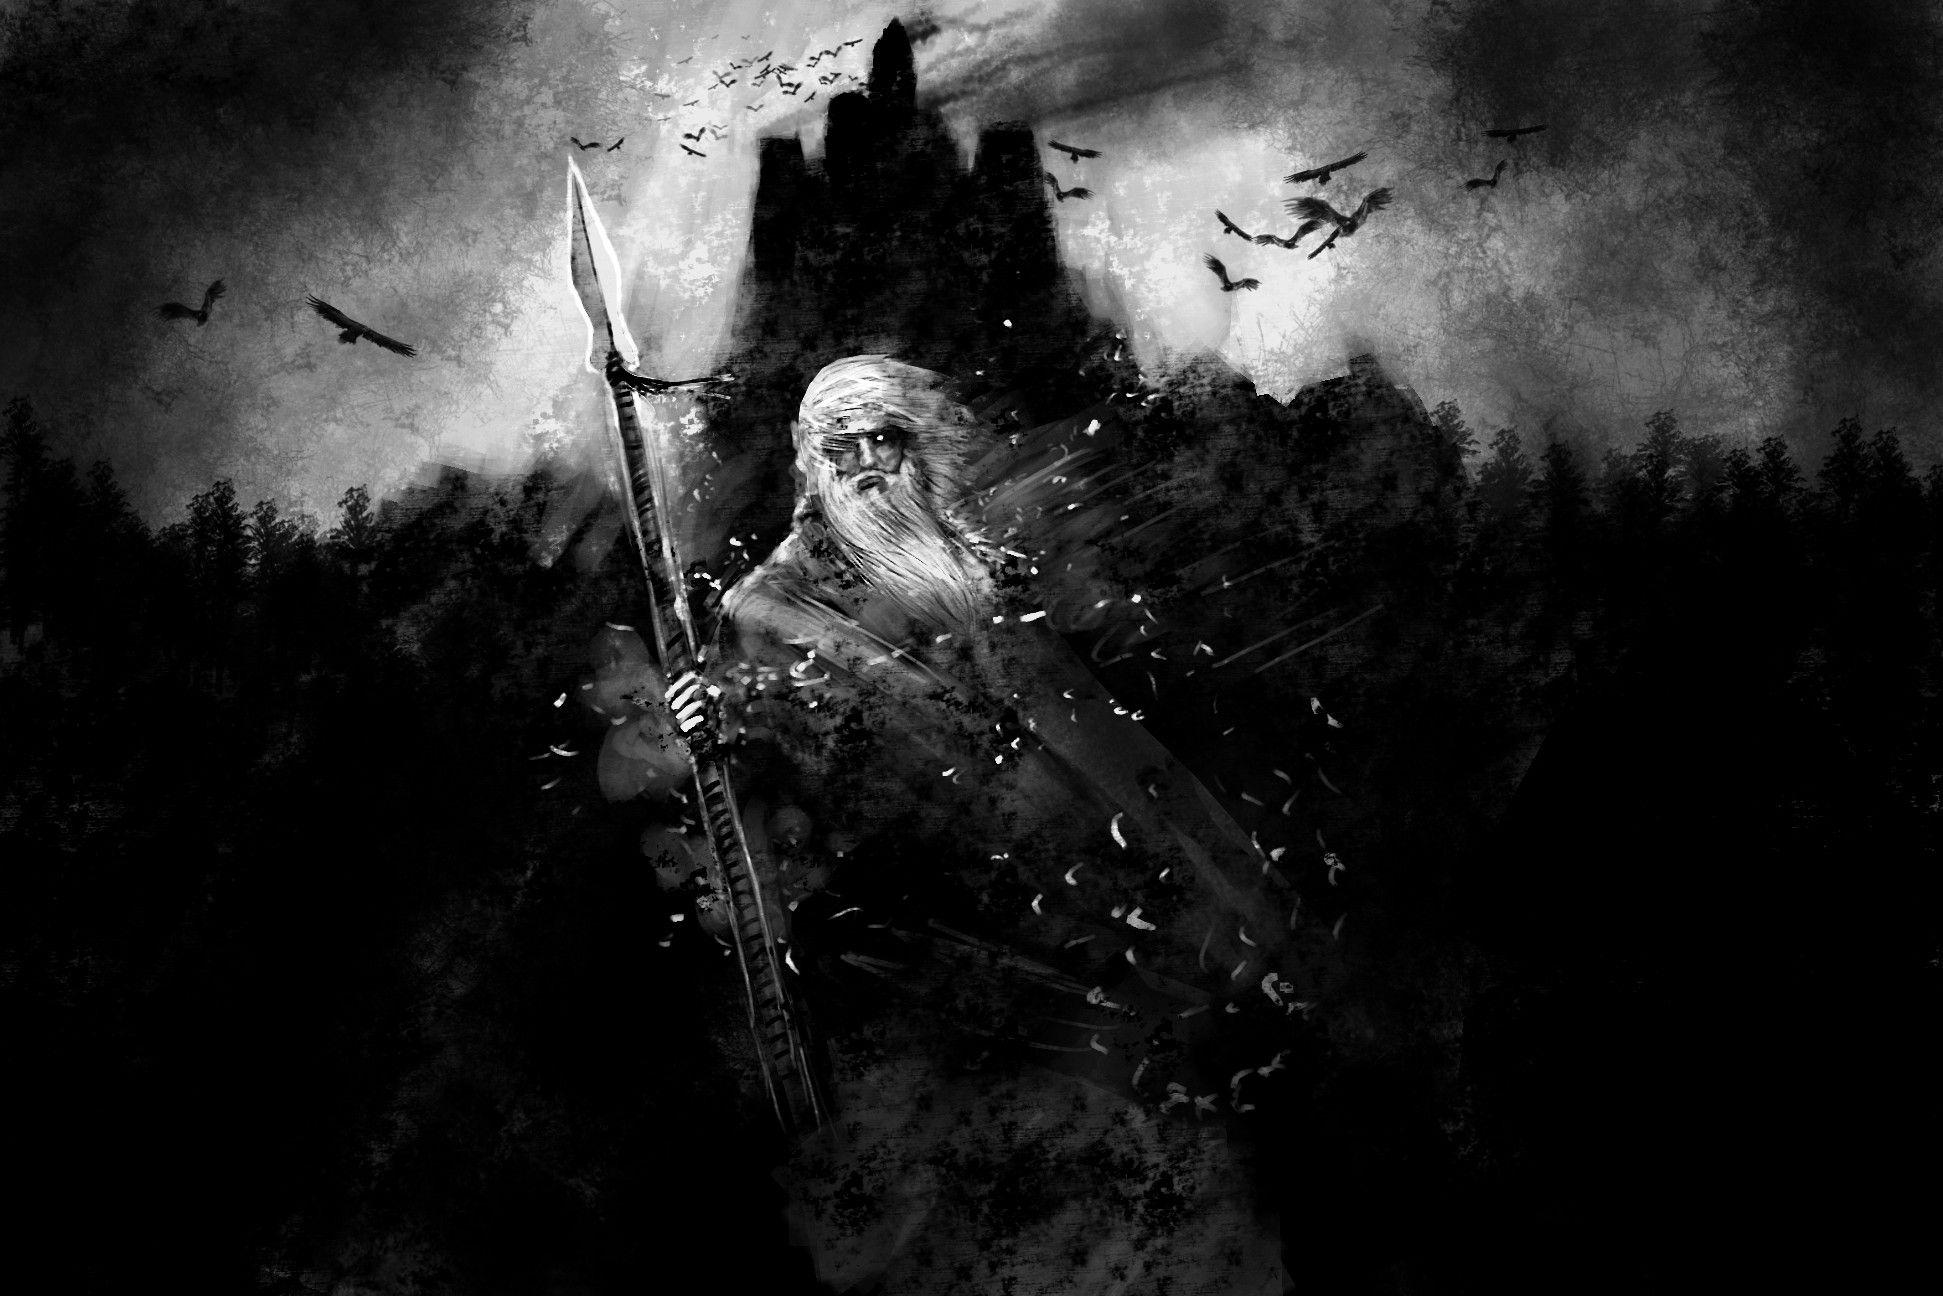 Odin Hd Viking Wallpaper Tons Of Awesome Vikings Wallpapers Hd To Download For Free